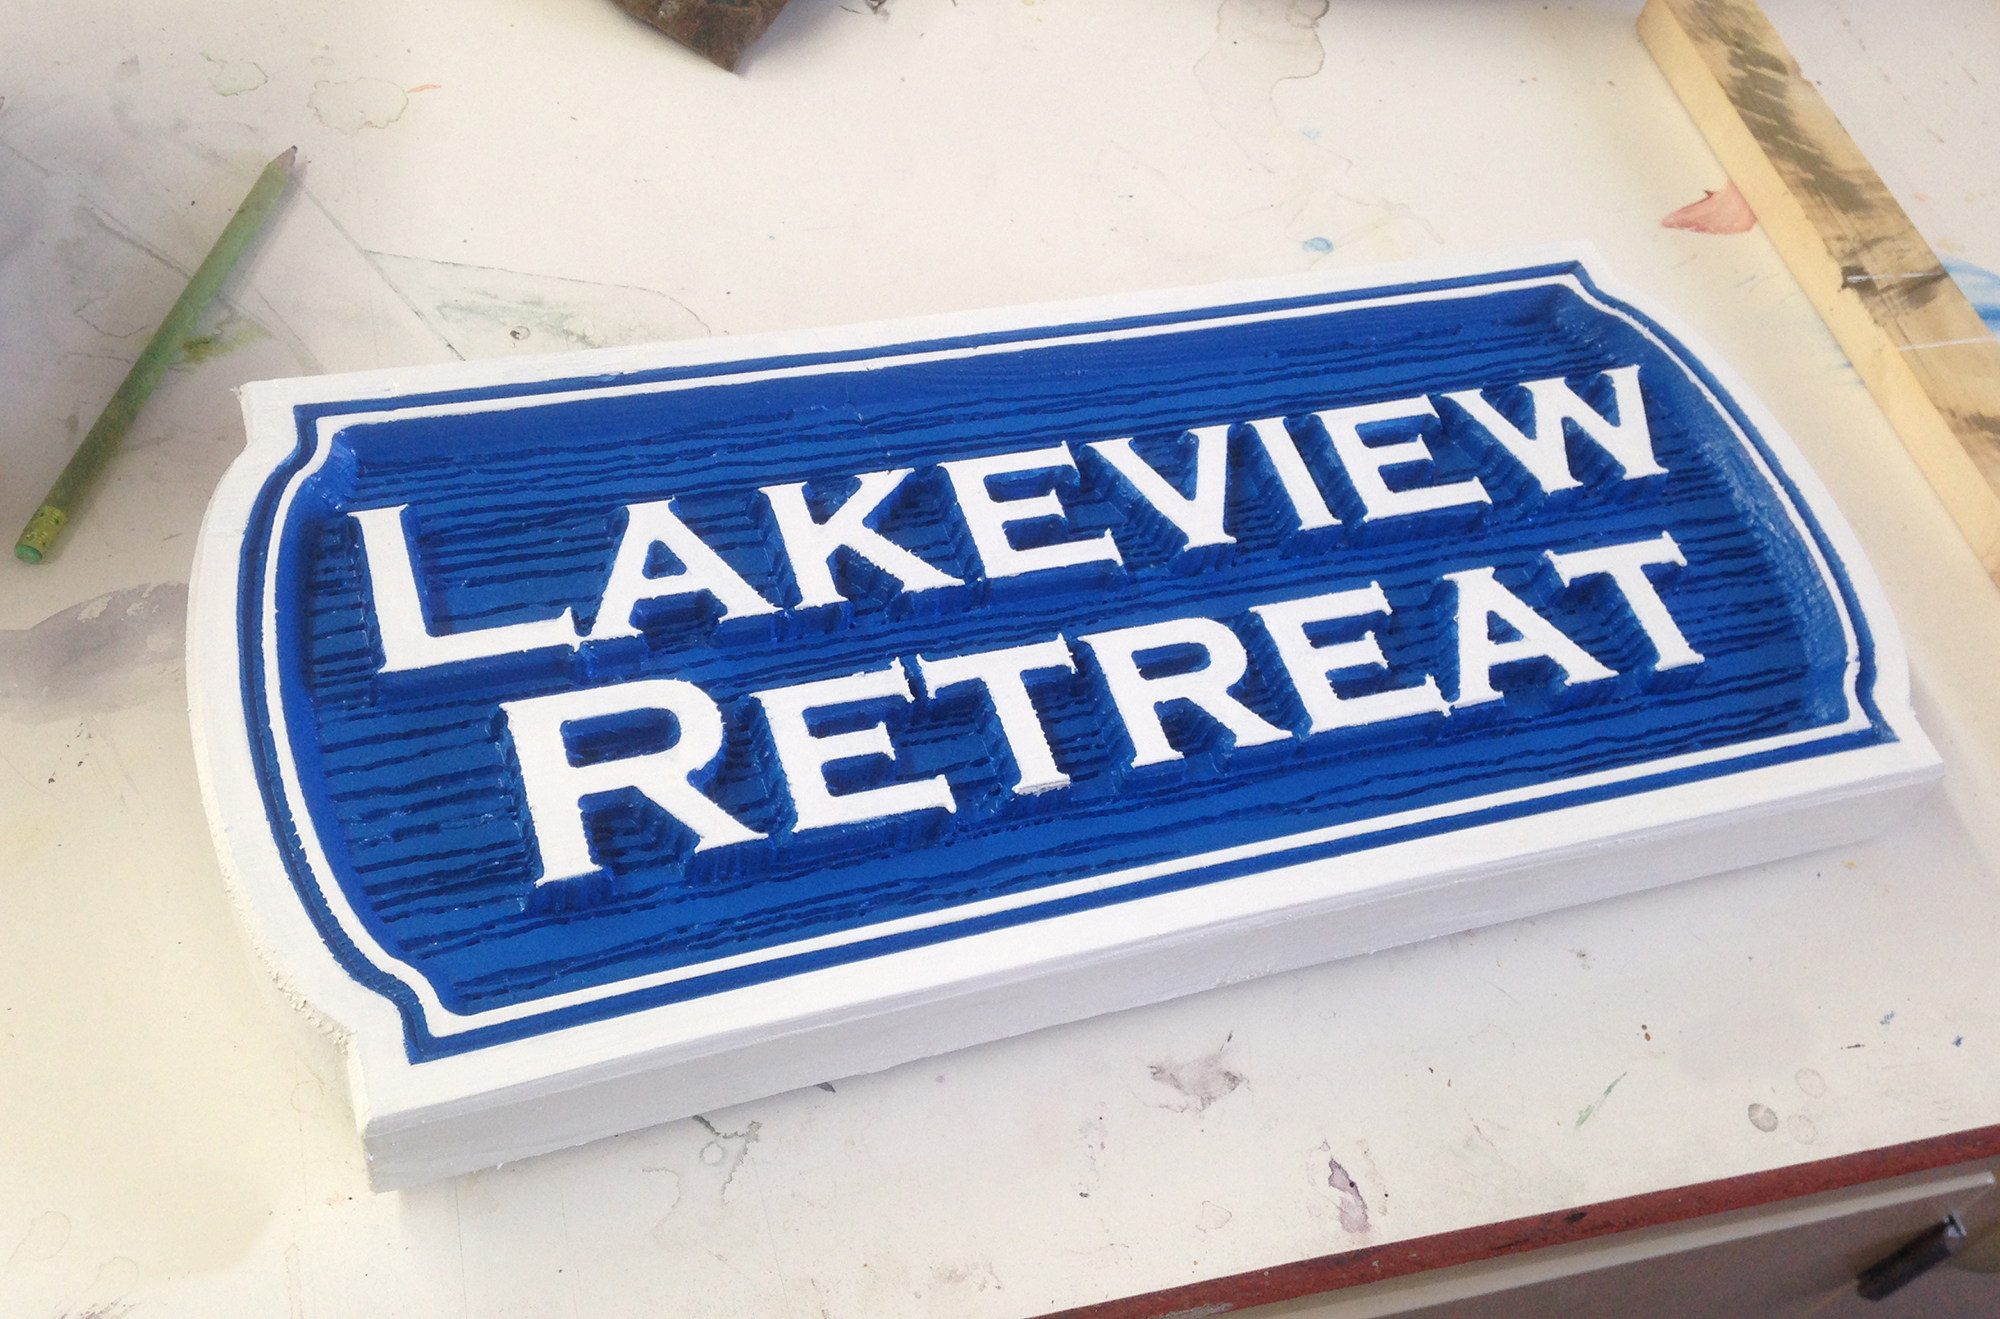 Lakeview Retreat sign with carved wood grain texture